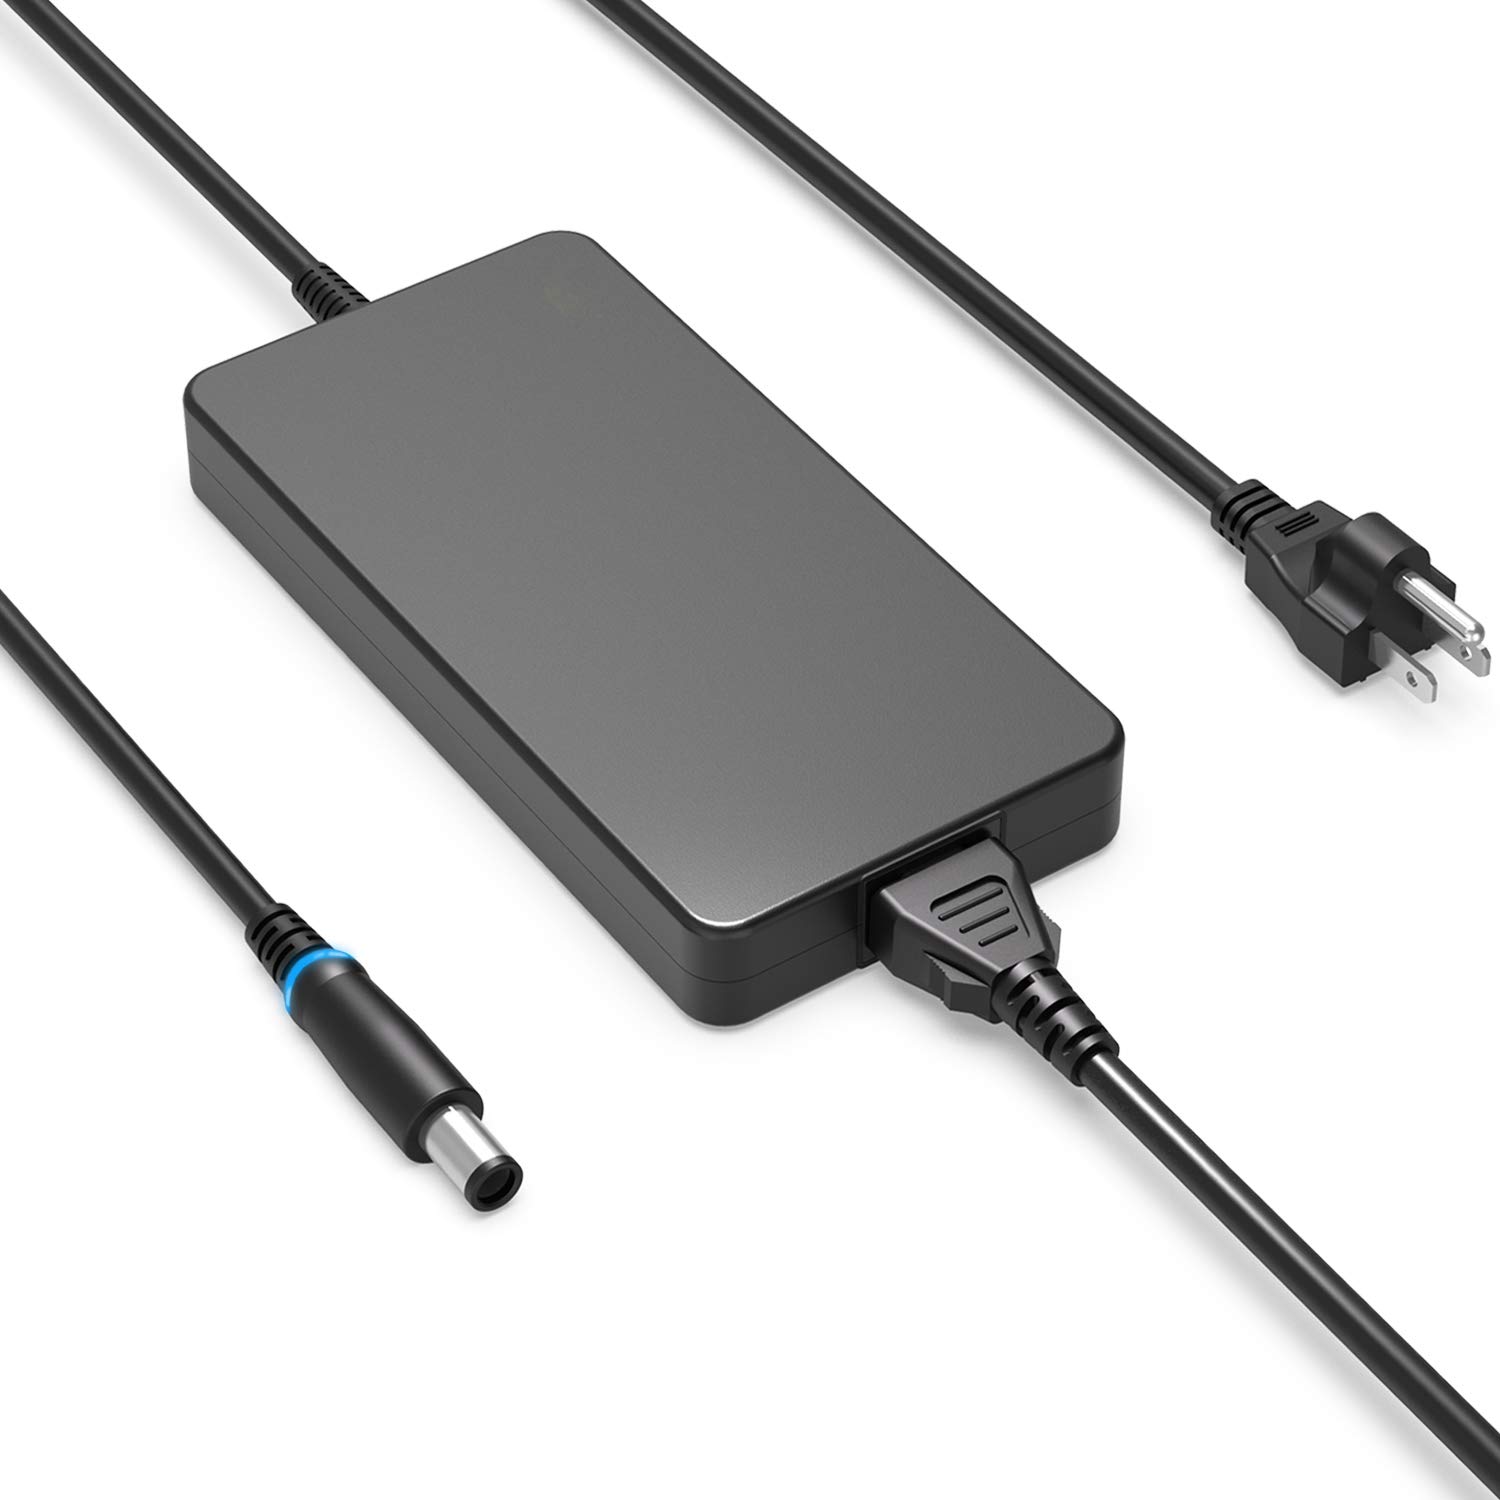 Ensure all display and audio cables are securely plugged into the appropriate ports on the Dell Thunderbolt Dock WD19TB and the connected devices.
Inspect the cables for any signs of damage or wear, such as frayed wires or bent pins.